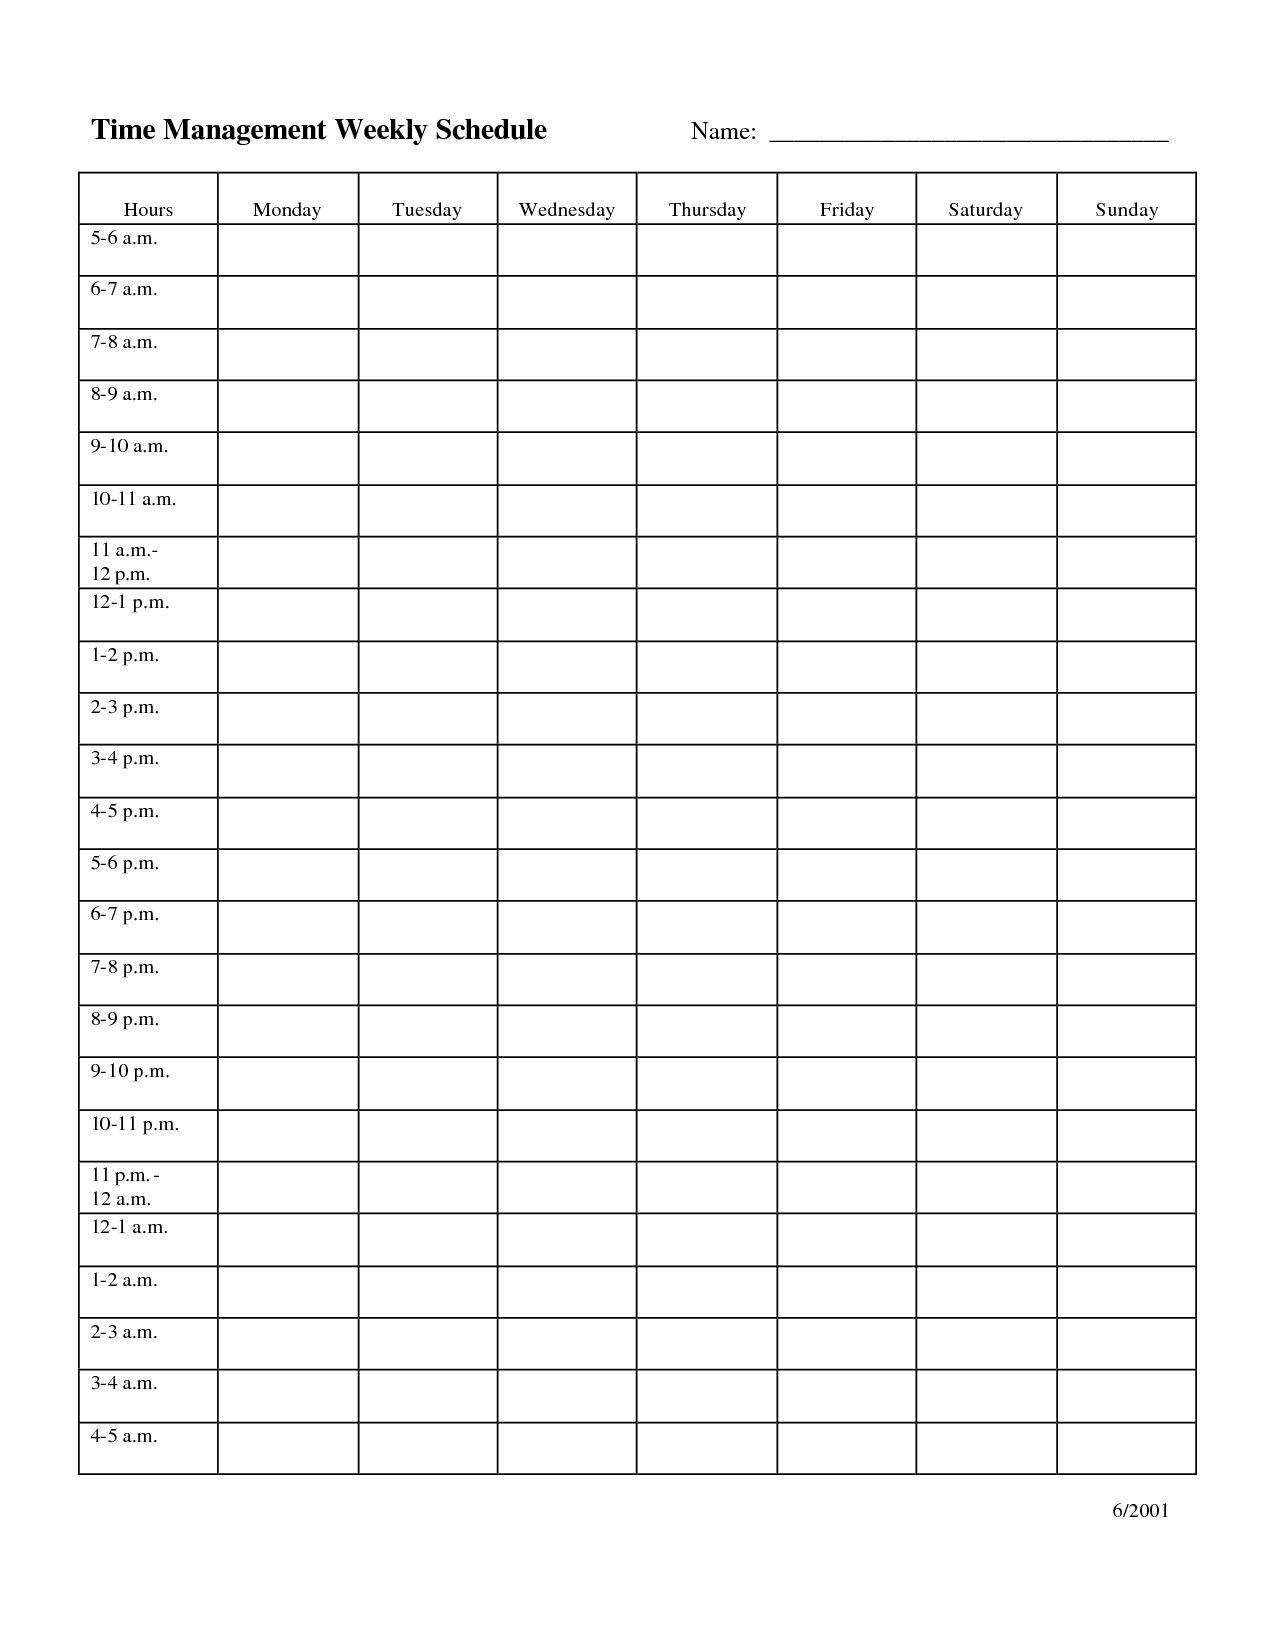 Time Management Weekly Schedule Template …